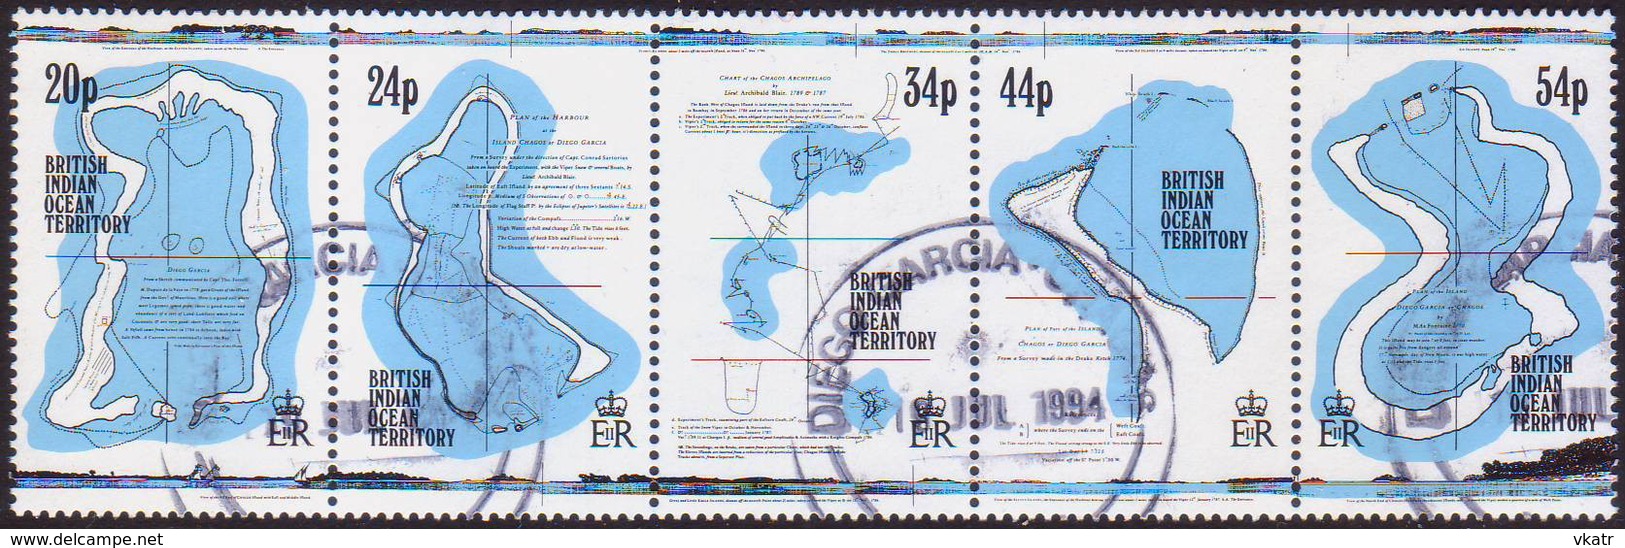 British Indian Ocean Territory 1994 SG 147-51 Compl.set In A Strip Of 5 Used 18th-century Maps - British Indian Ocean Territory (BIOT)